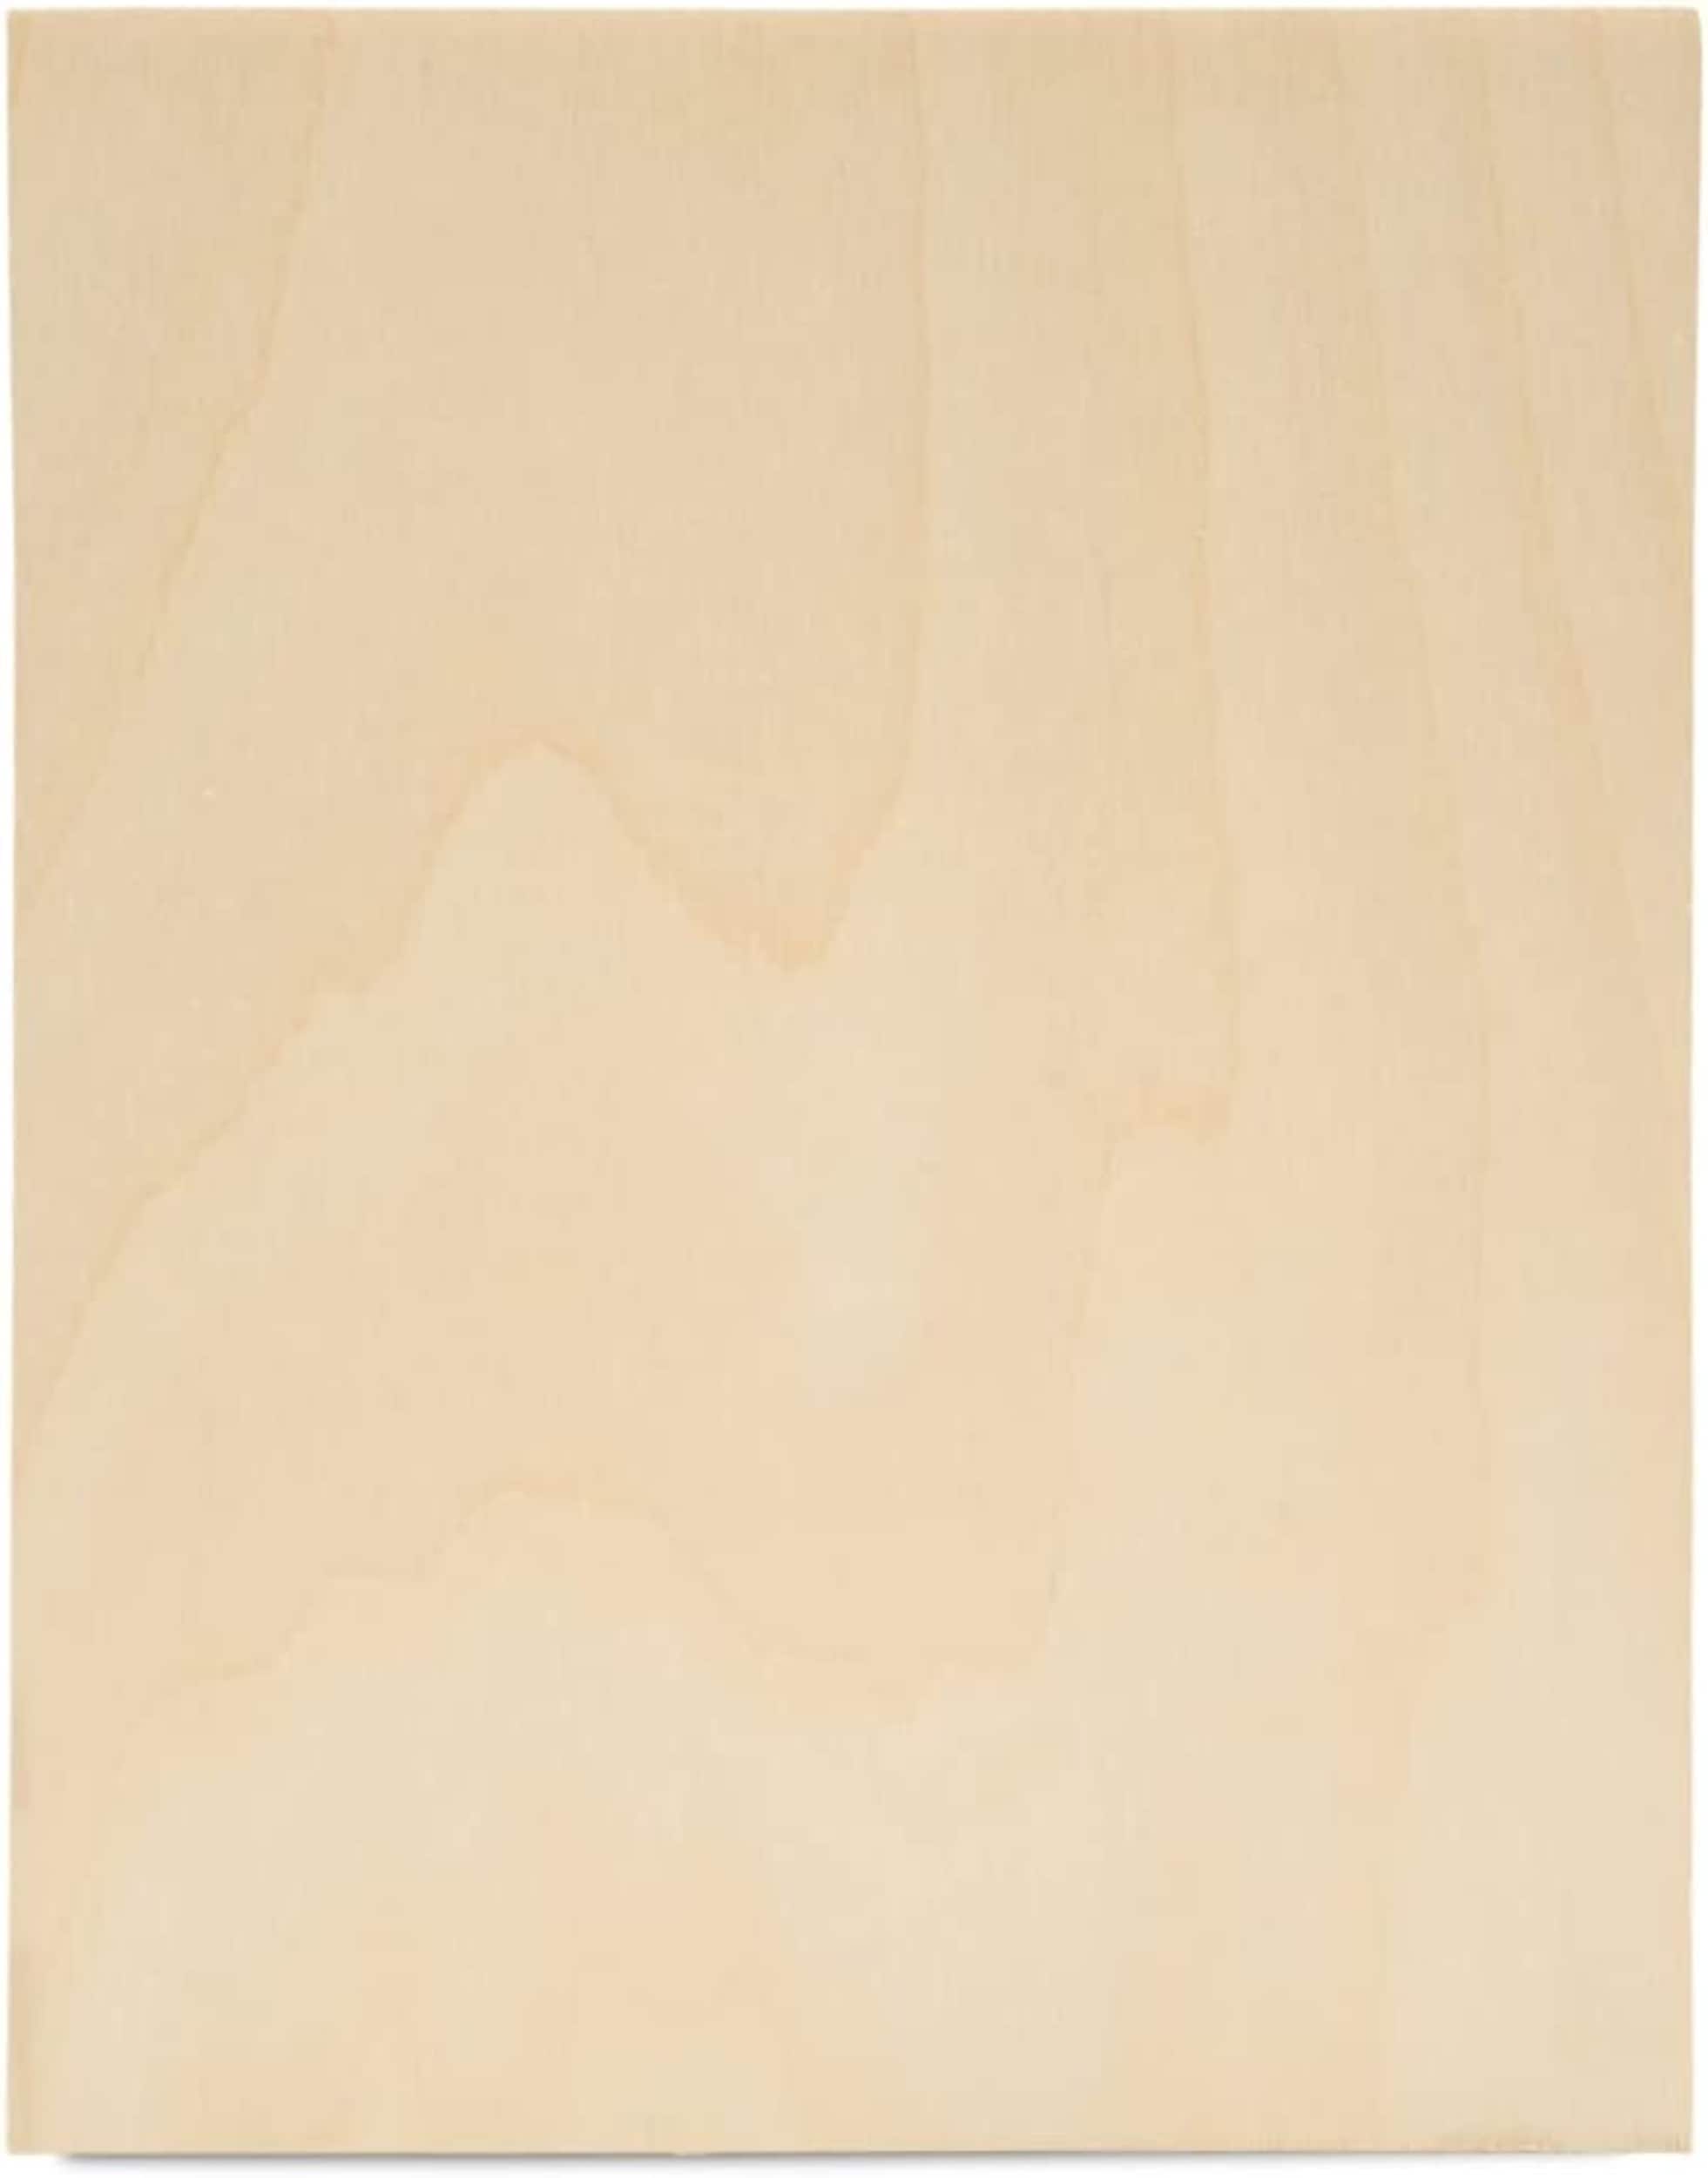 Woodpeckers Crafts Baltic Birch Plywood, 3 mm 1/8 x 8 in. Craft Wood, Box of 8 B/bb in Brown | MF-PLY-8-8-18-P8